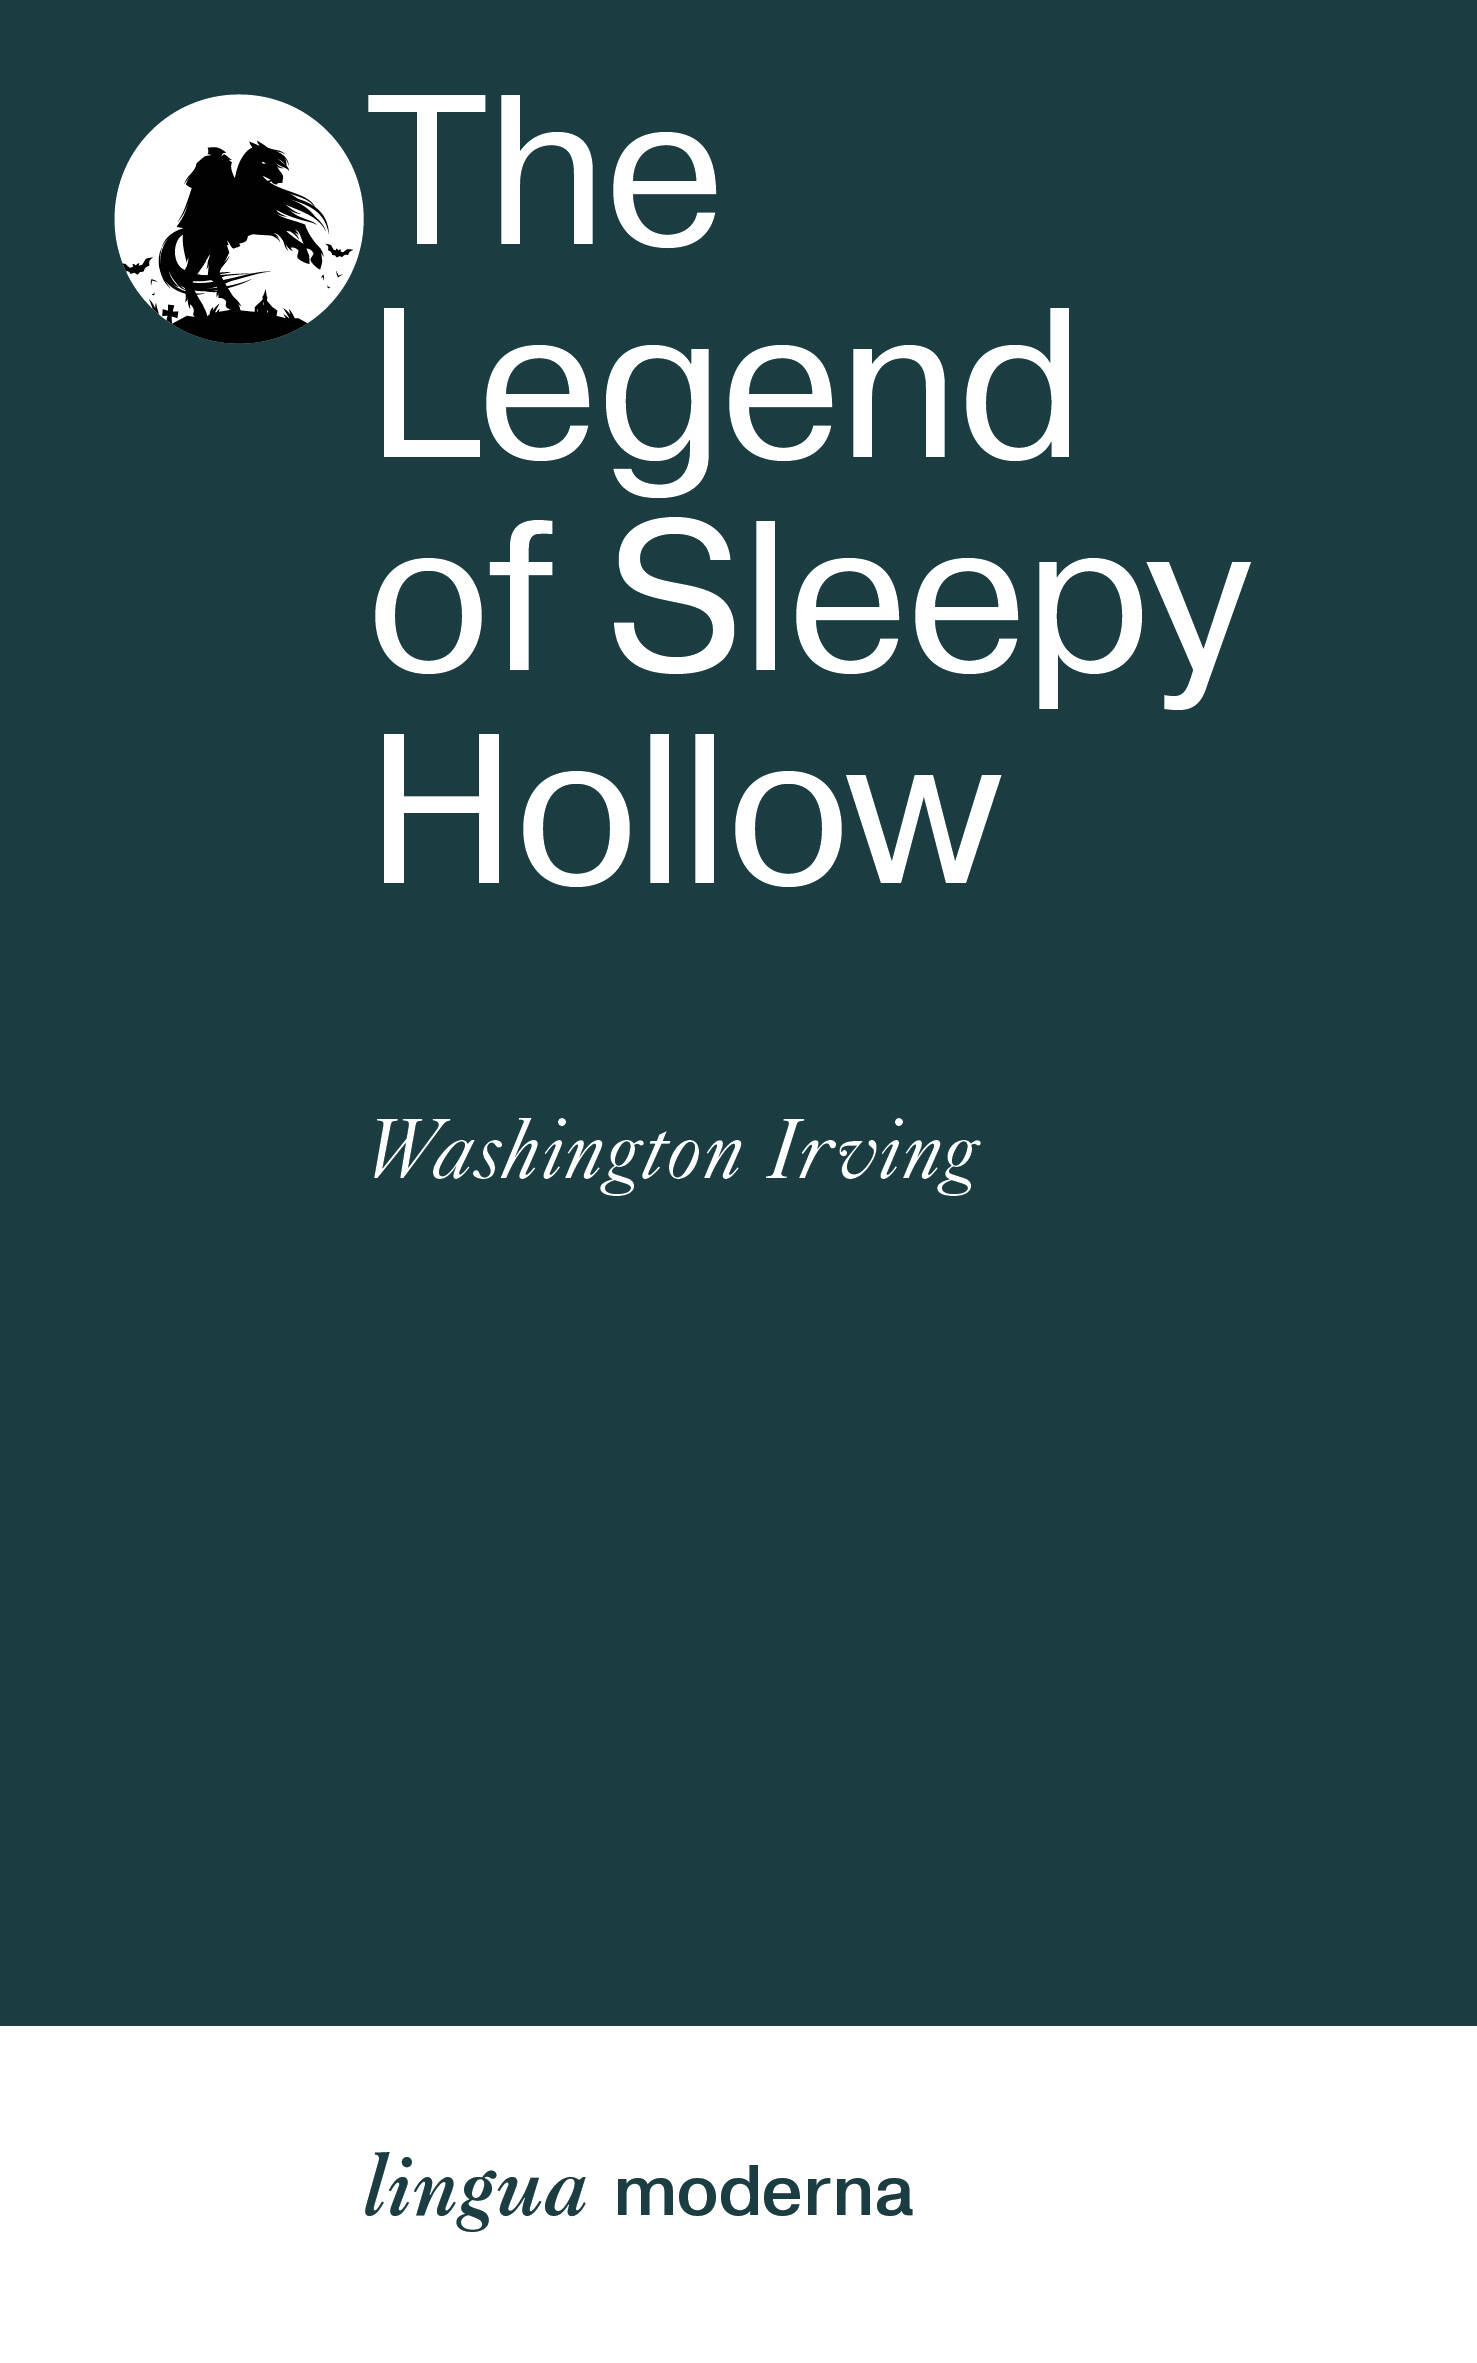 Irving Washington The Legend of Sleepy Hollow irving washington the legend of sleepy hollow and other stories